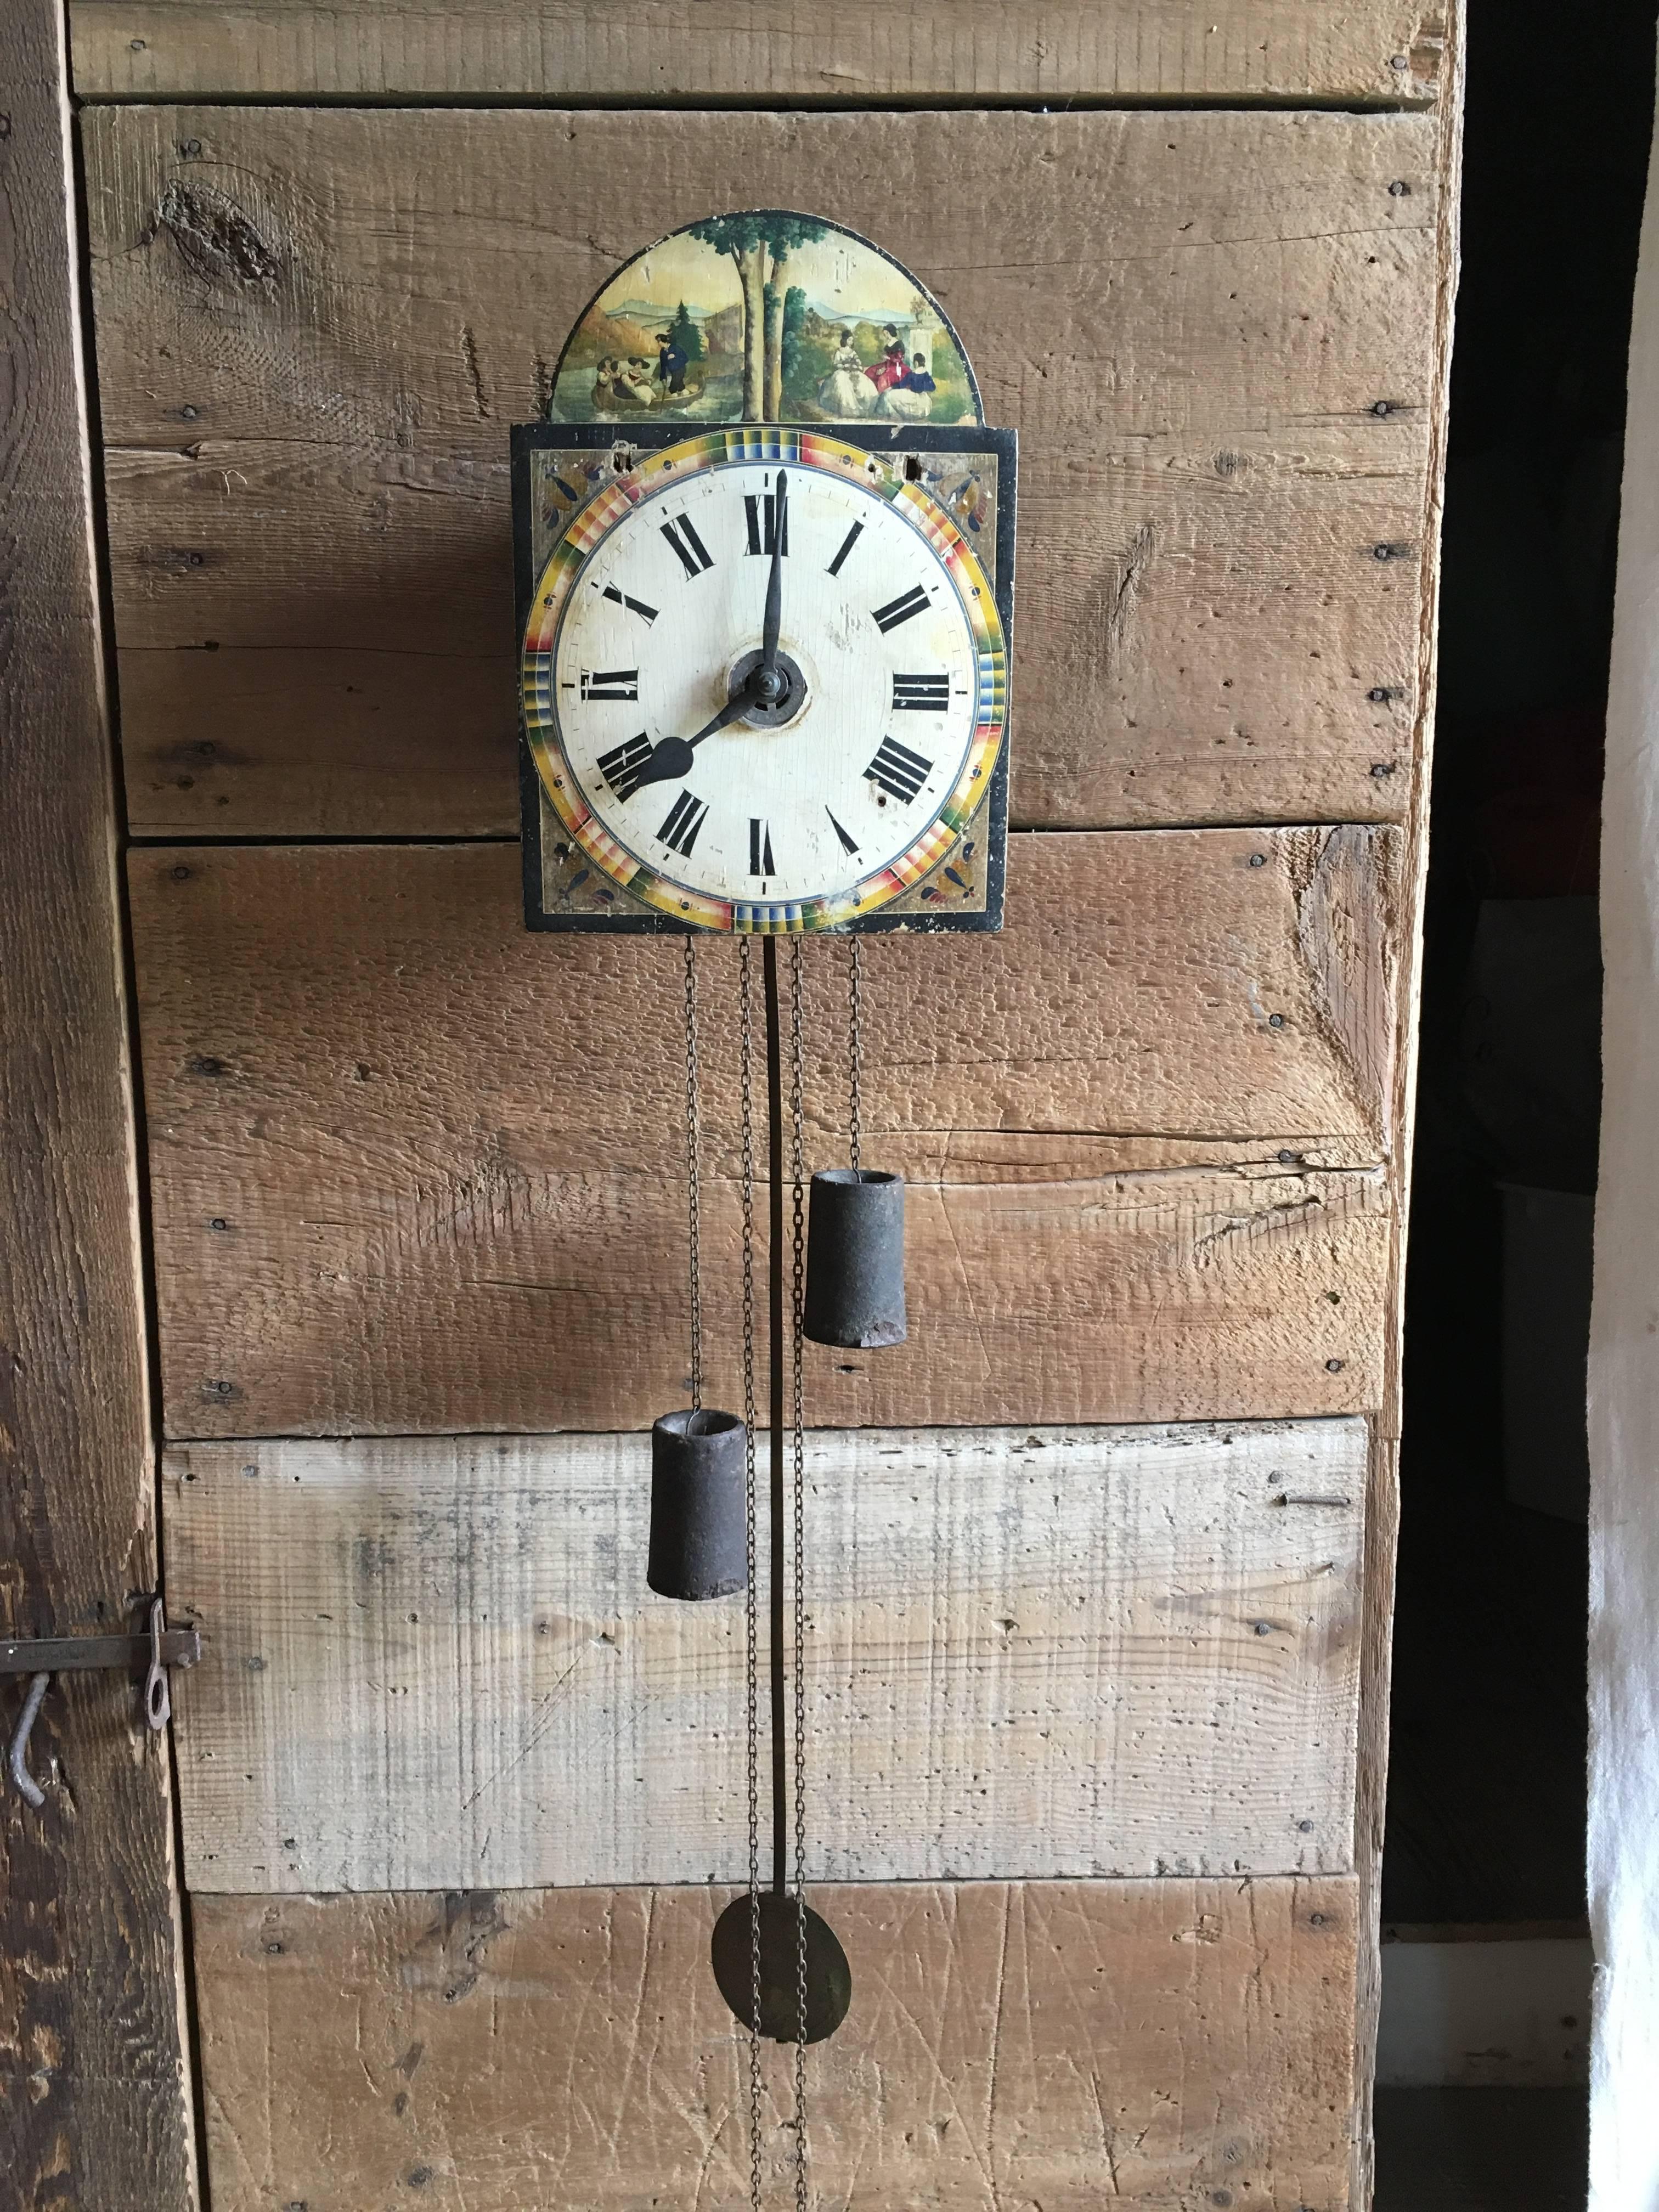 A charming French or German 18th century wall clock without case, the wood face with a painted courting scenes, the clock appears to be complete and working but needs to be cleaned and balanced. Chimes on hour and half. 
Pendulum adds 30” to height.